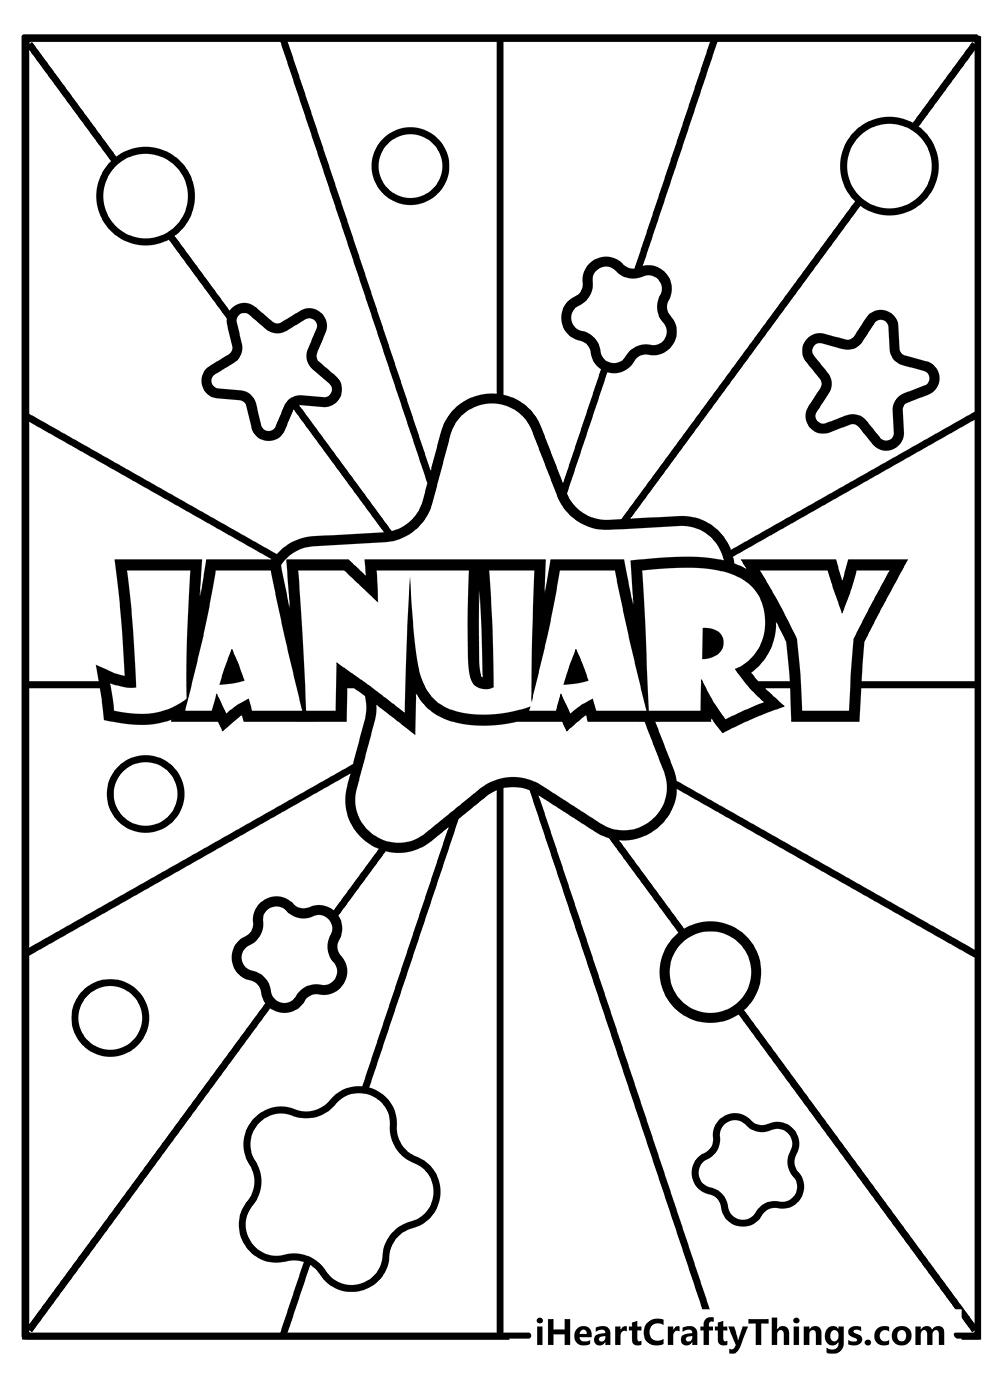 January Coloring Book free printable